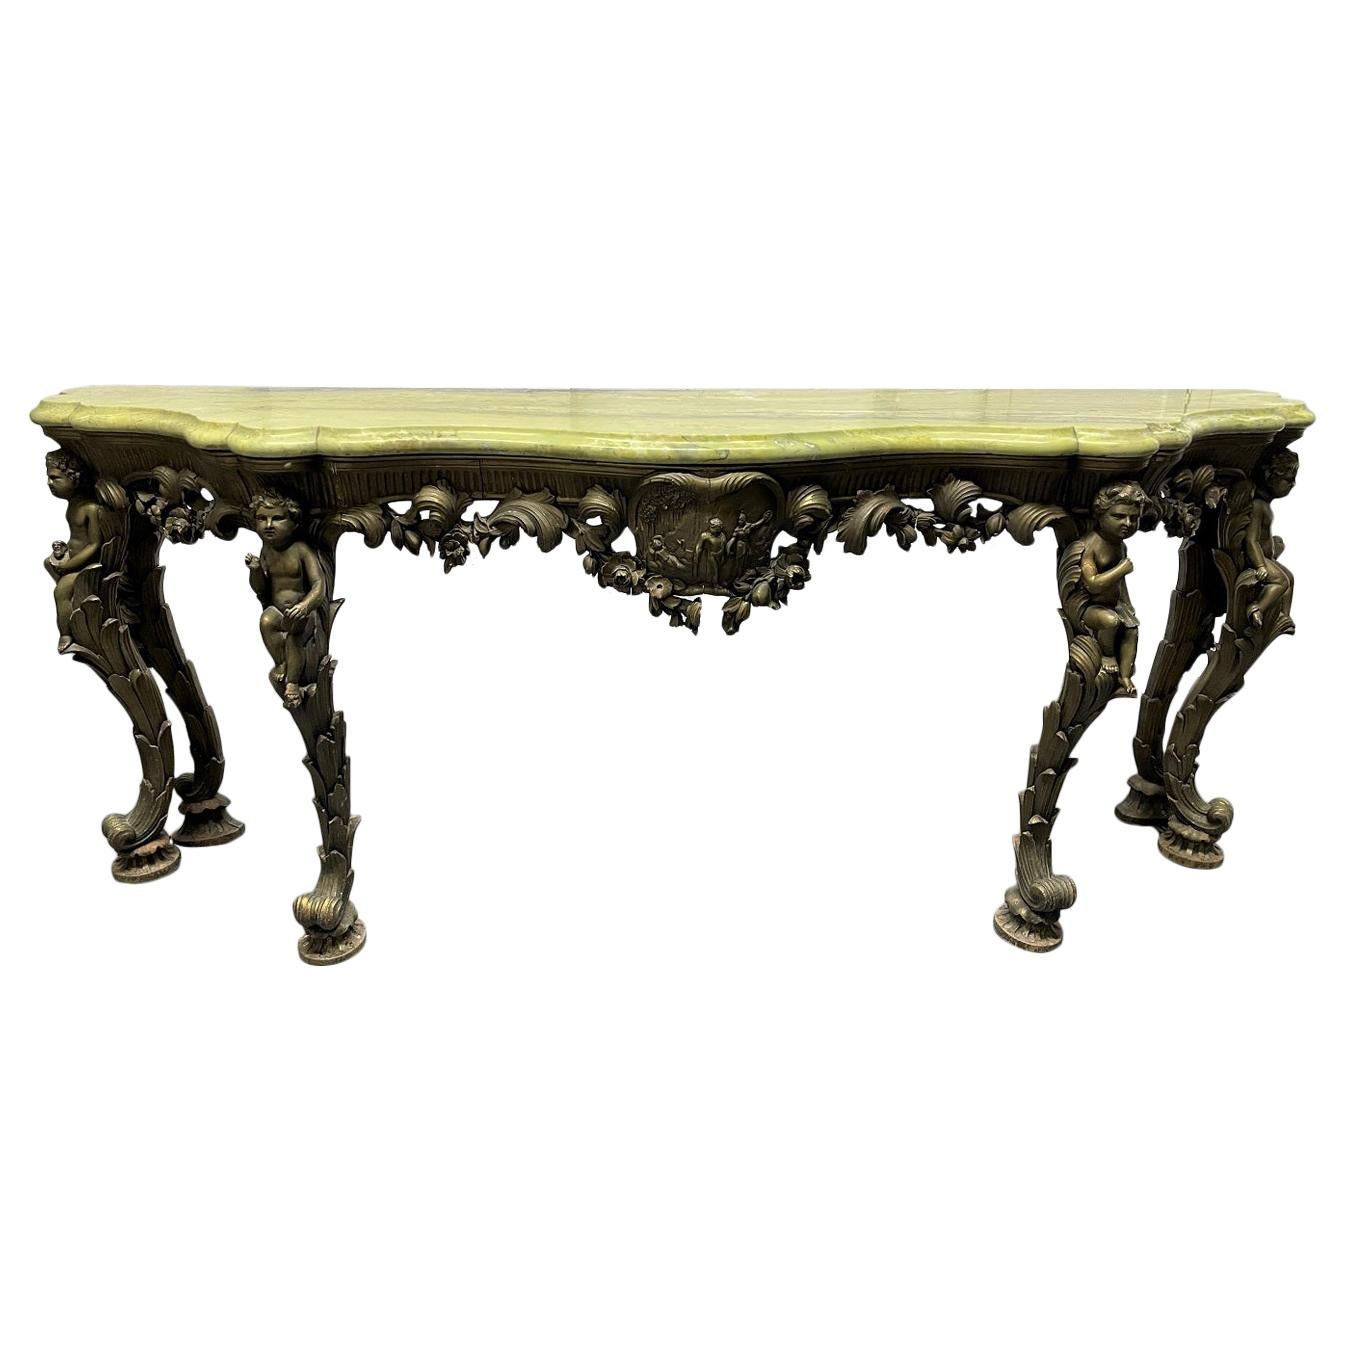 19th Century Italian Carved Wood Marble-Top Console with Puttis For Sale